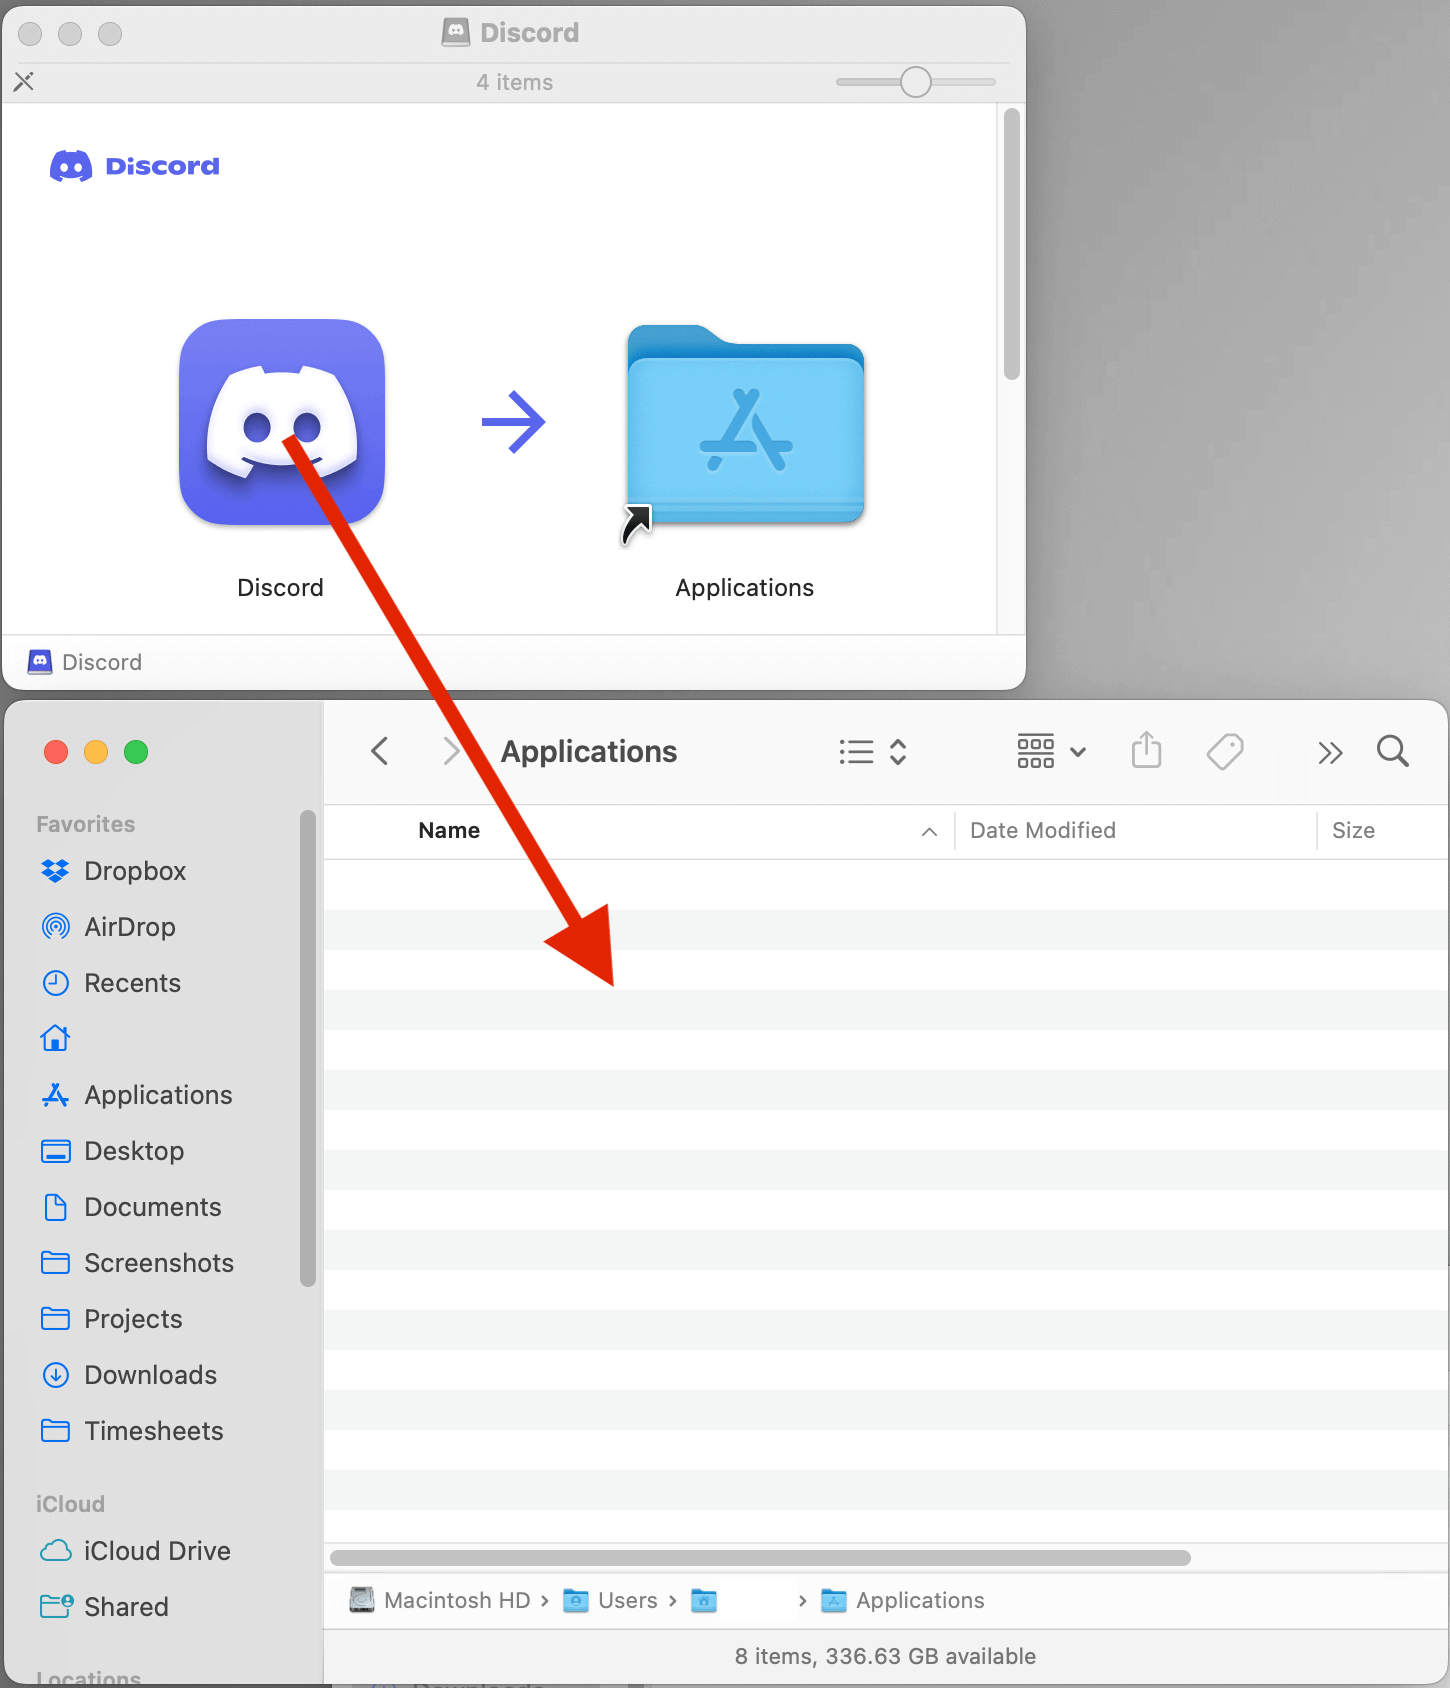 Showing the process of dragging the application icon into the Applications folder.